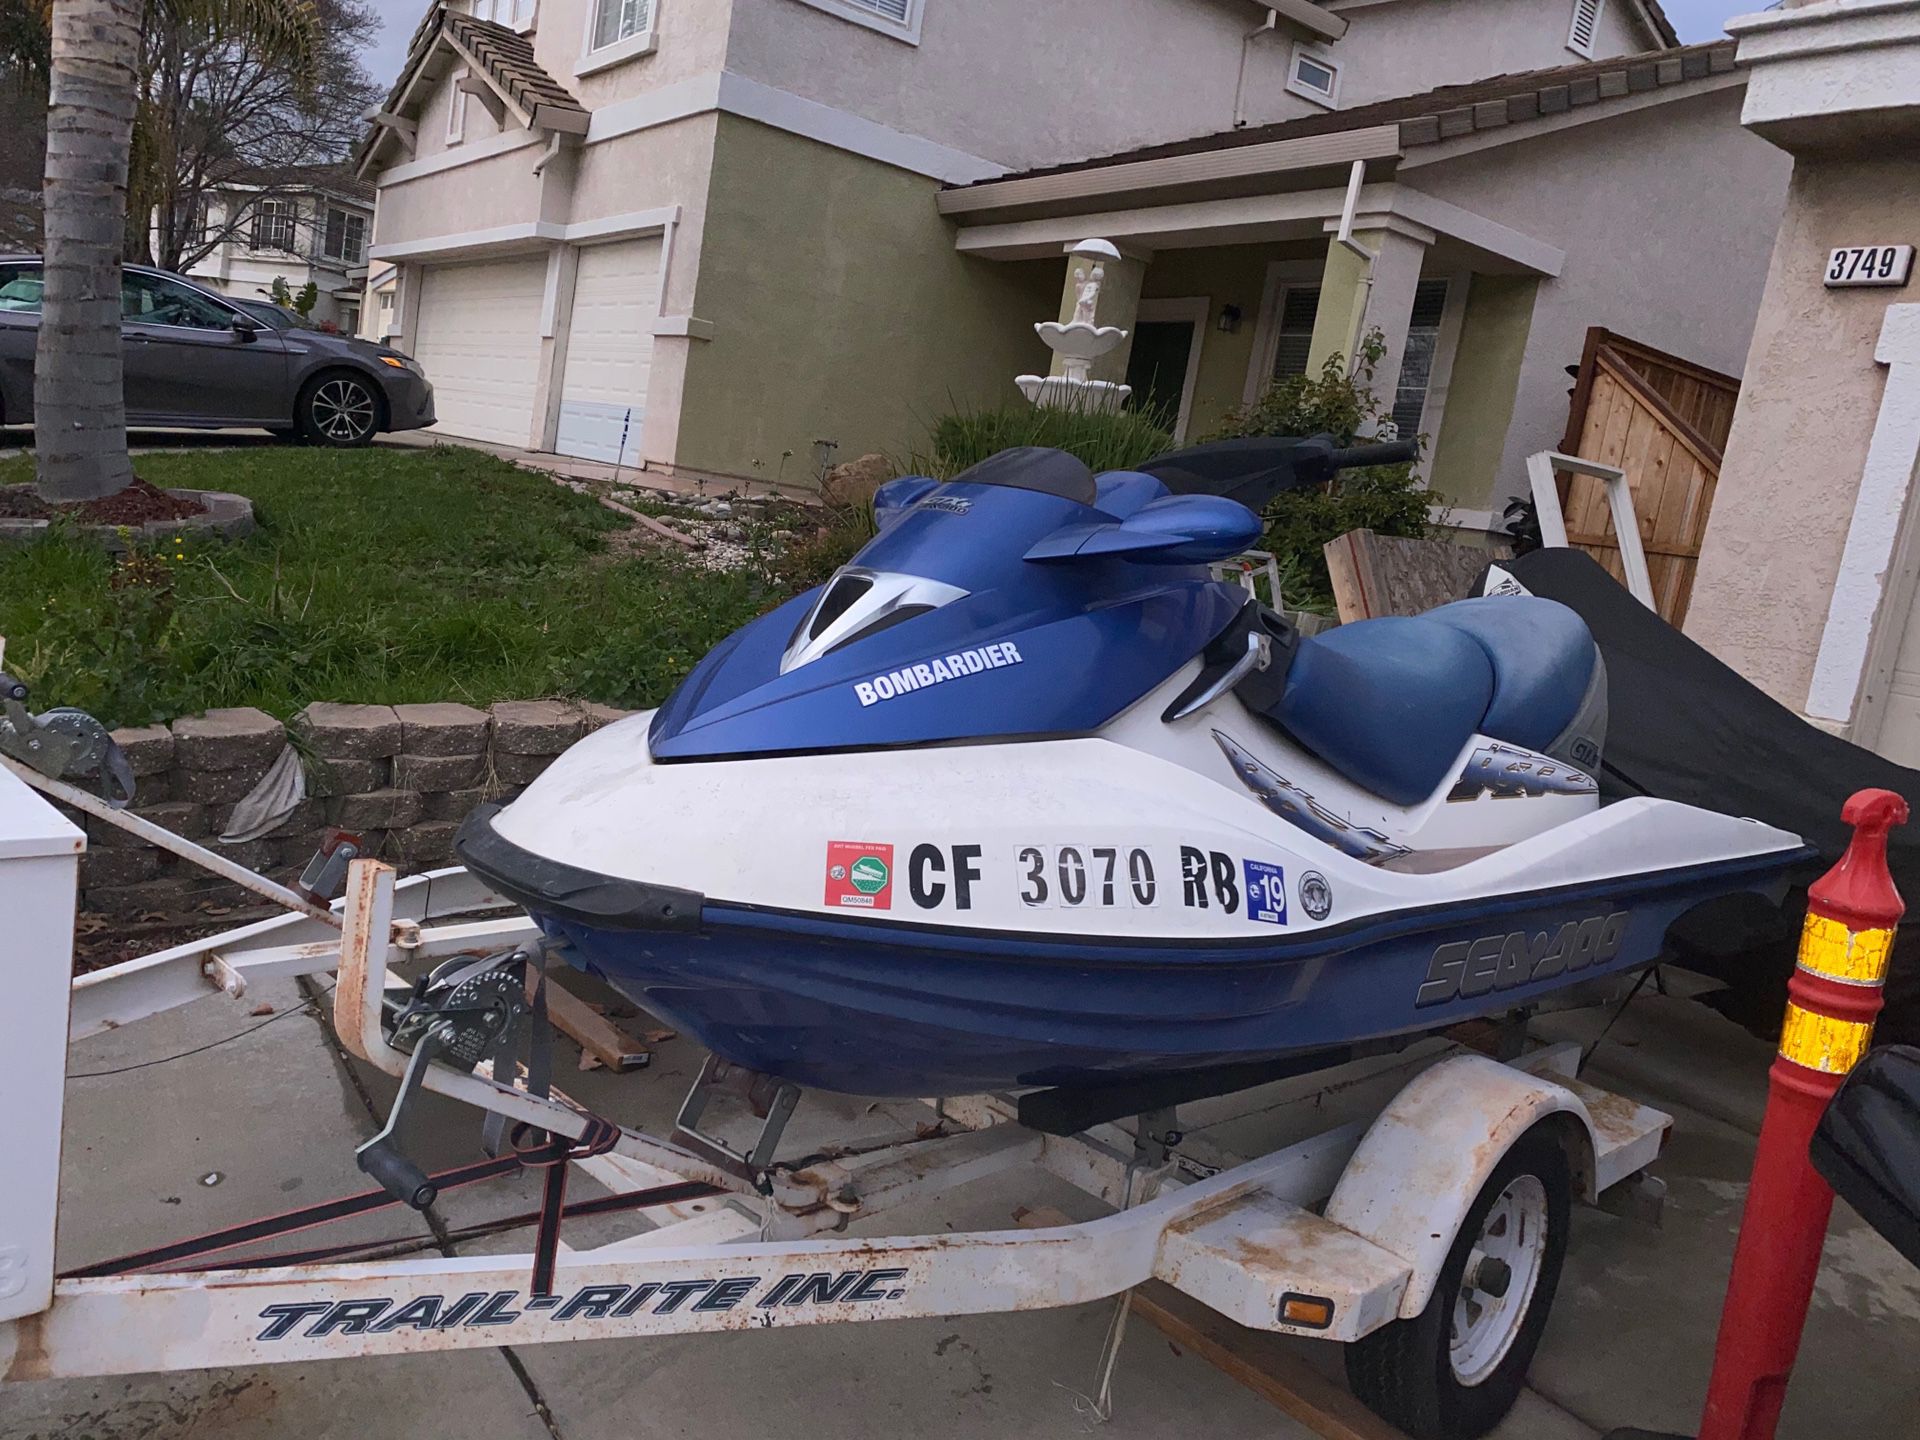 Jet ski and double wide Trailer - $2500